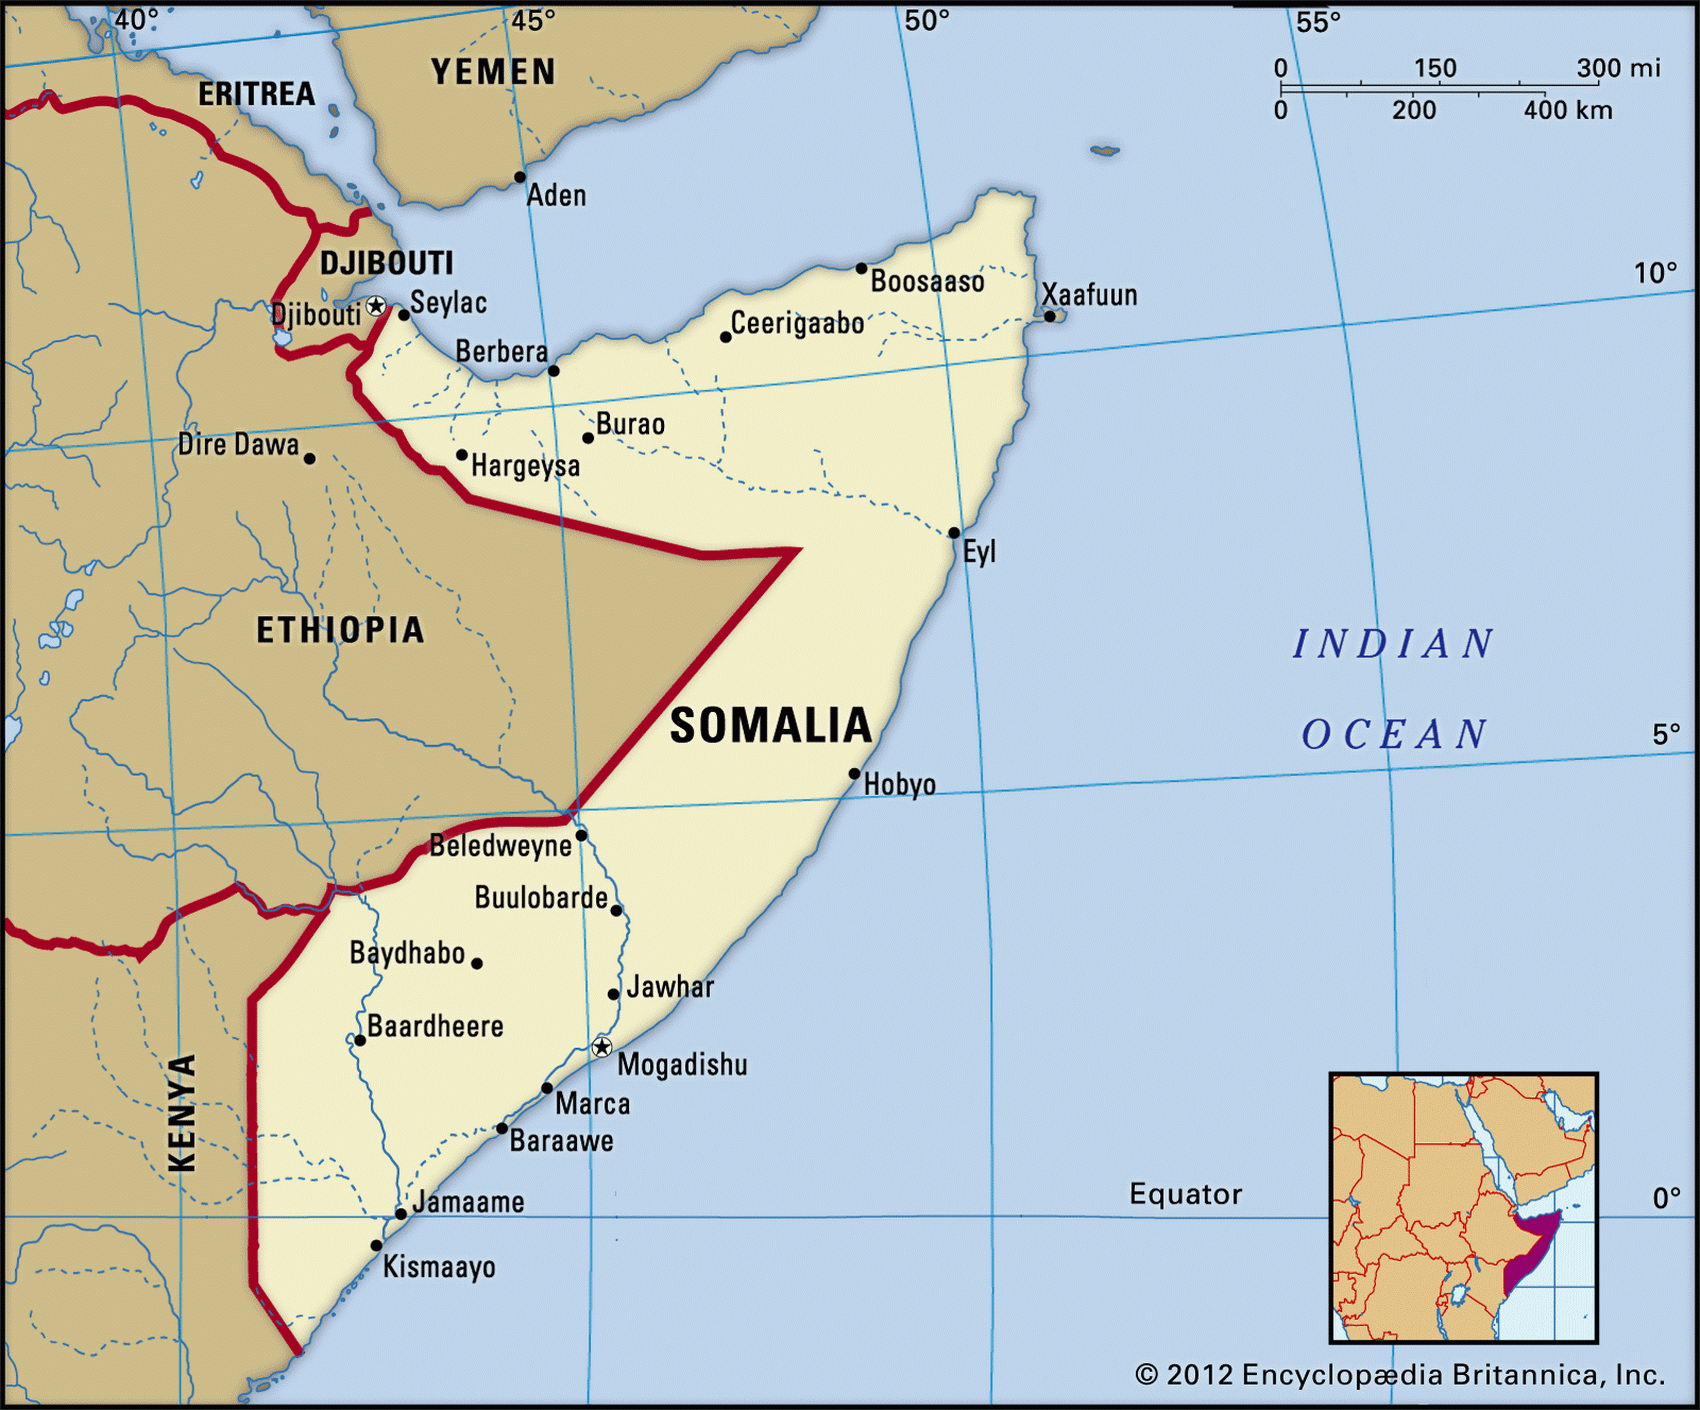 Map of Somalia and geographical facts, Where Somalia on the world map